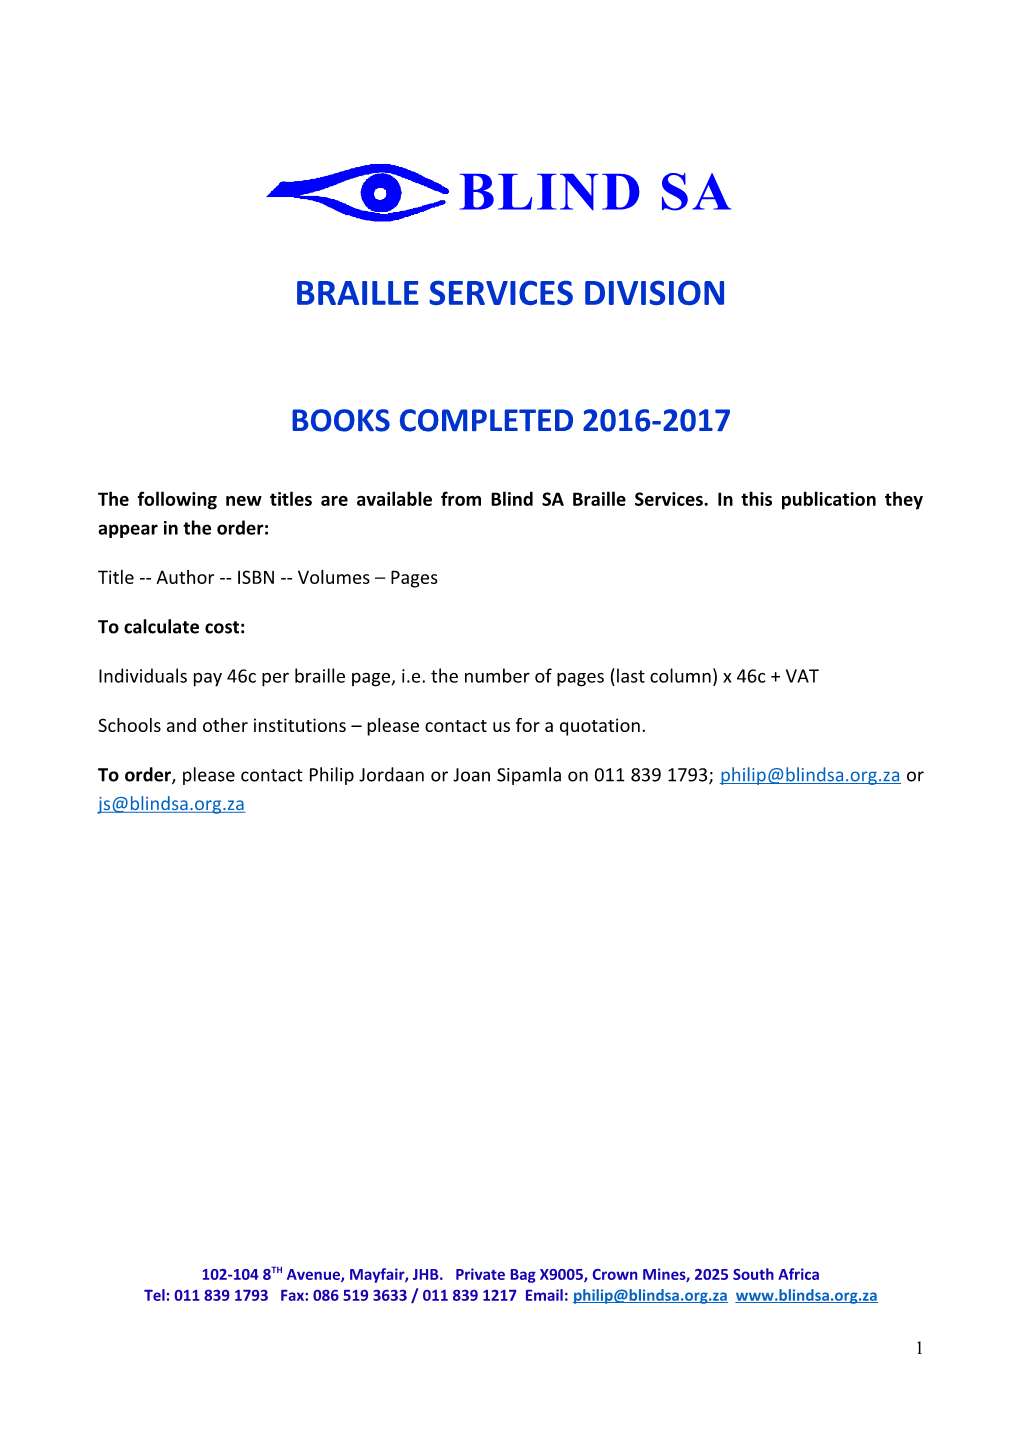 Braille Services Division